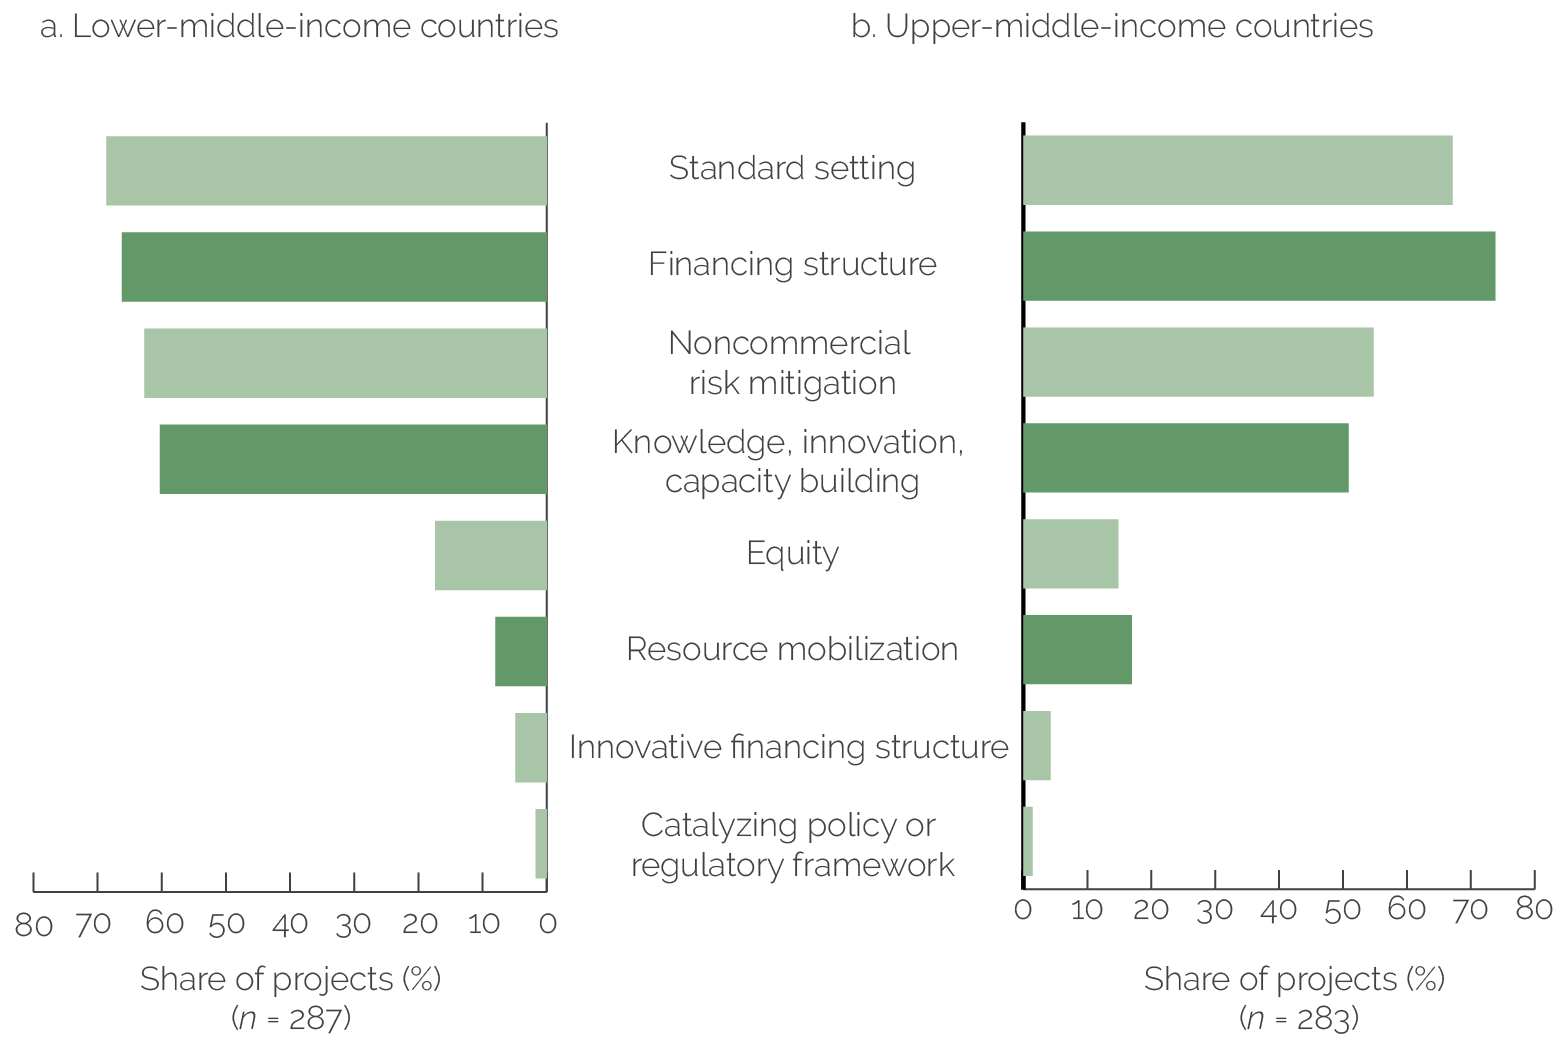 A bar graph of the share of projects using additionality subtypes shows how additionality varies based on country income.